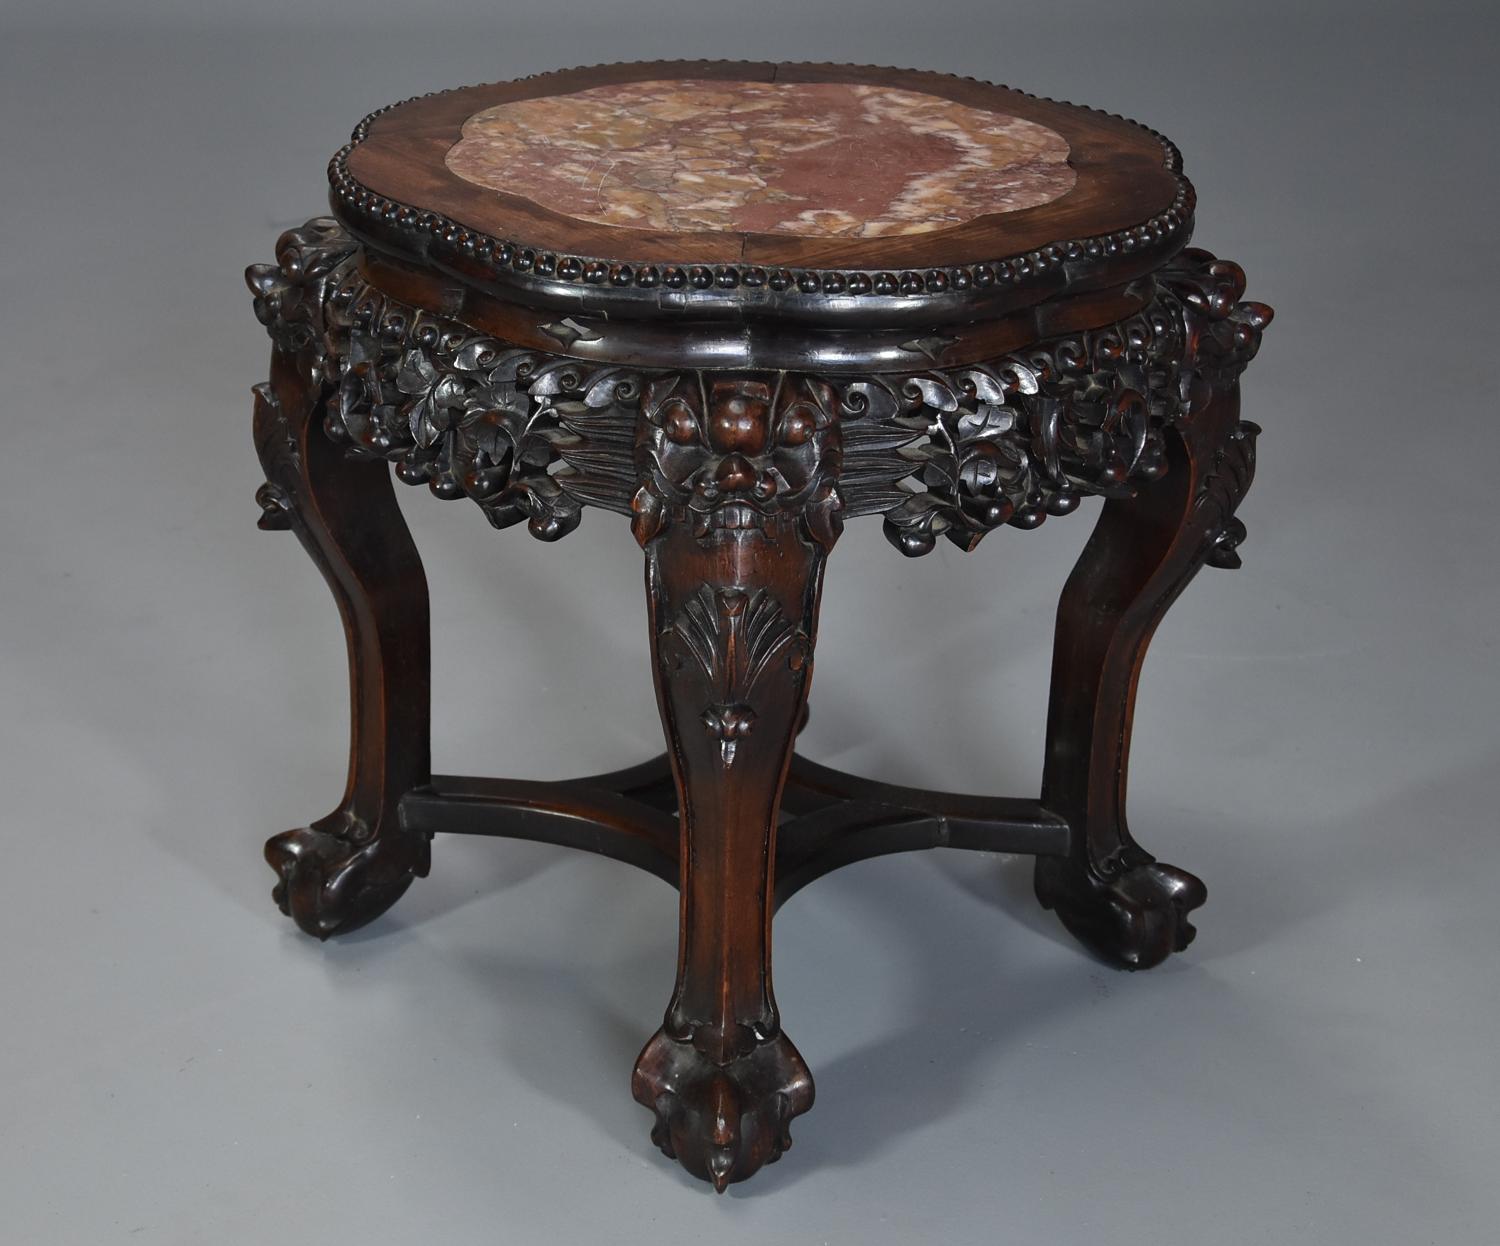 Late 19th century Chinese low table or pot stand